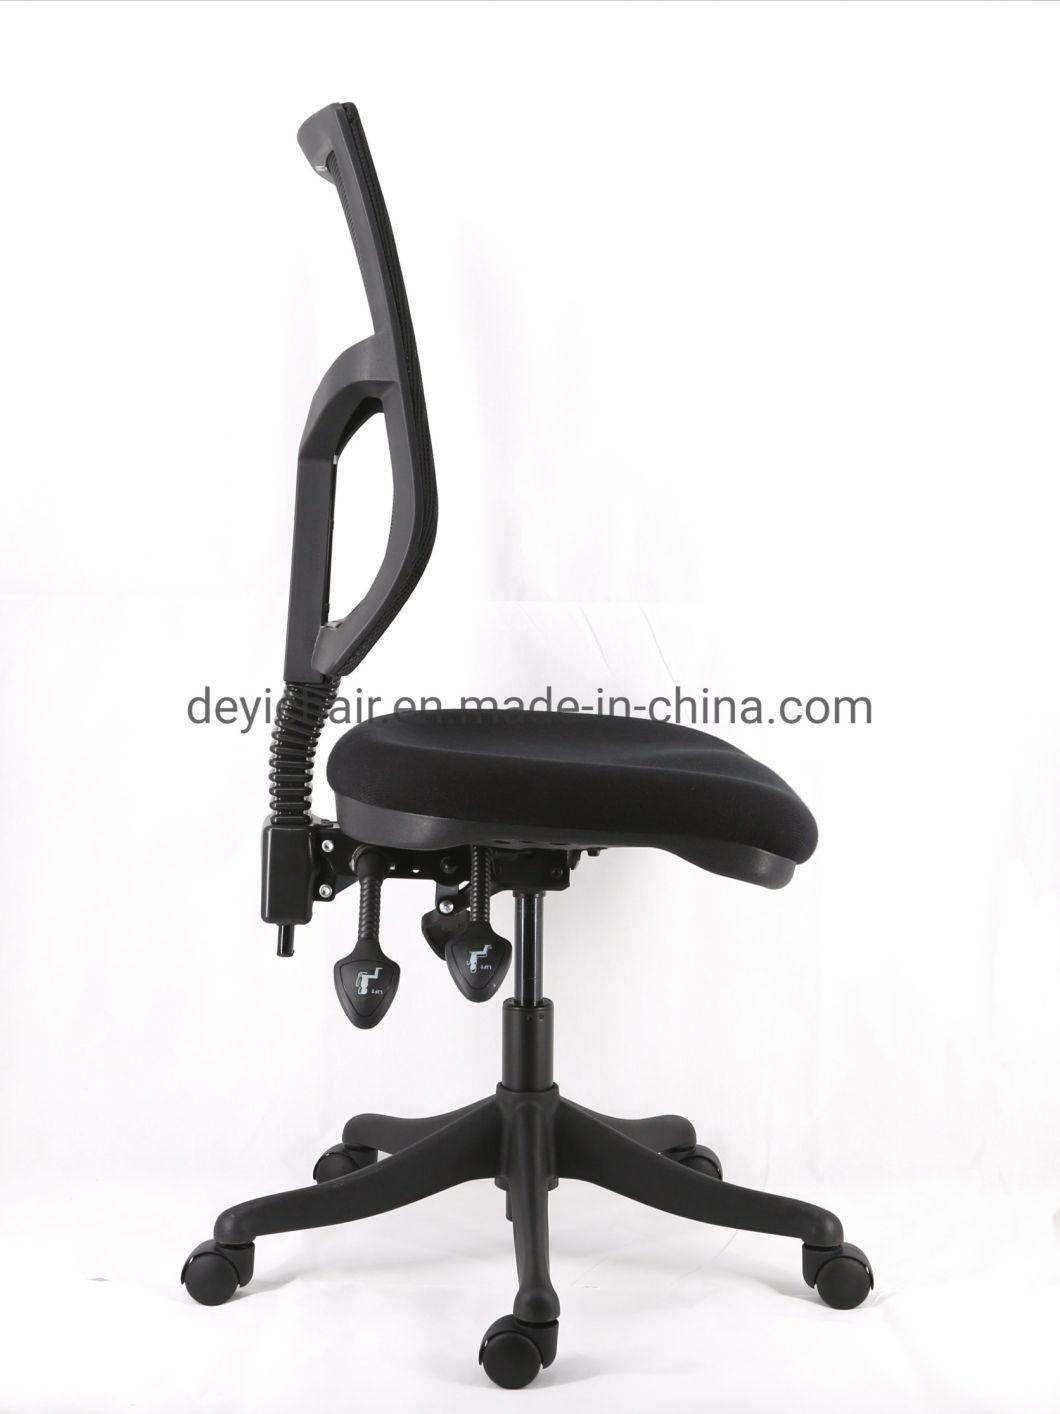 Arm Available Back Support Available Funcional Mechanism Nylon Base PU Caster Mesh Computer Chair